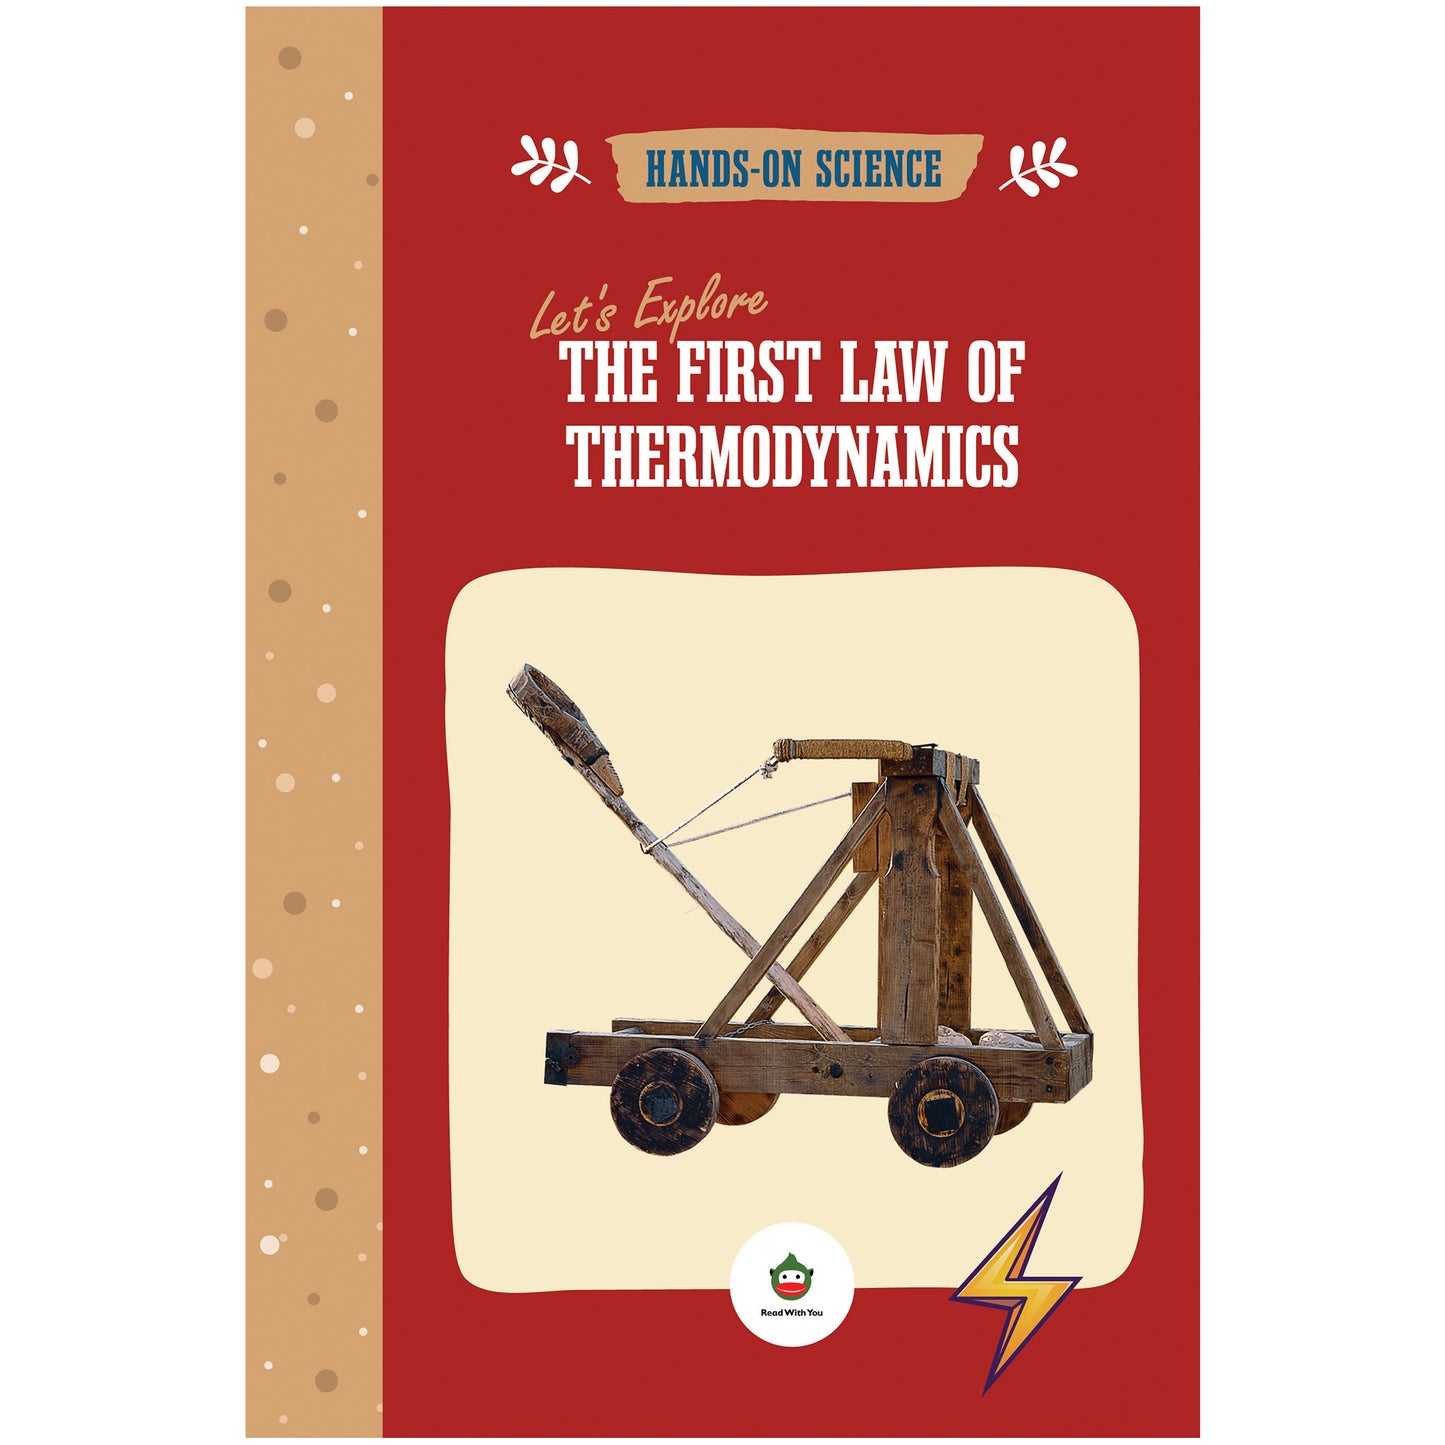 Let's Explore the First Law of Thermodynamics